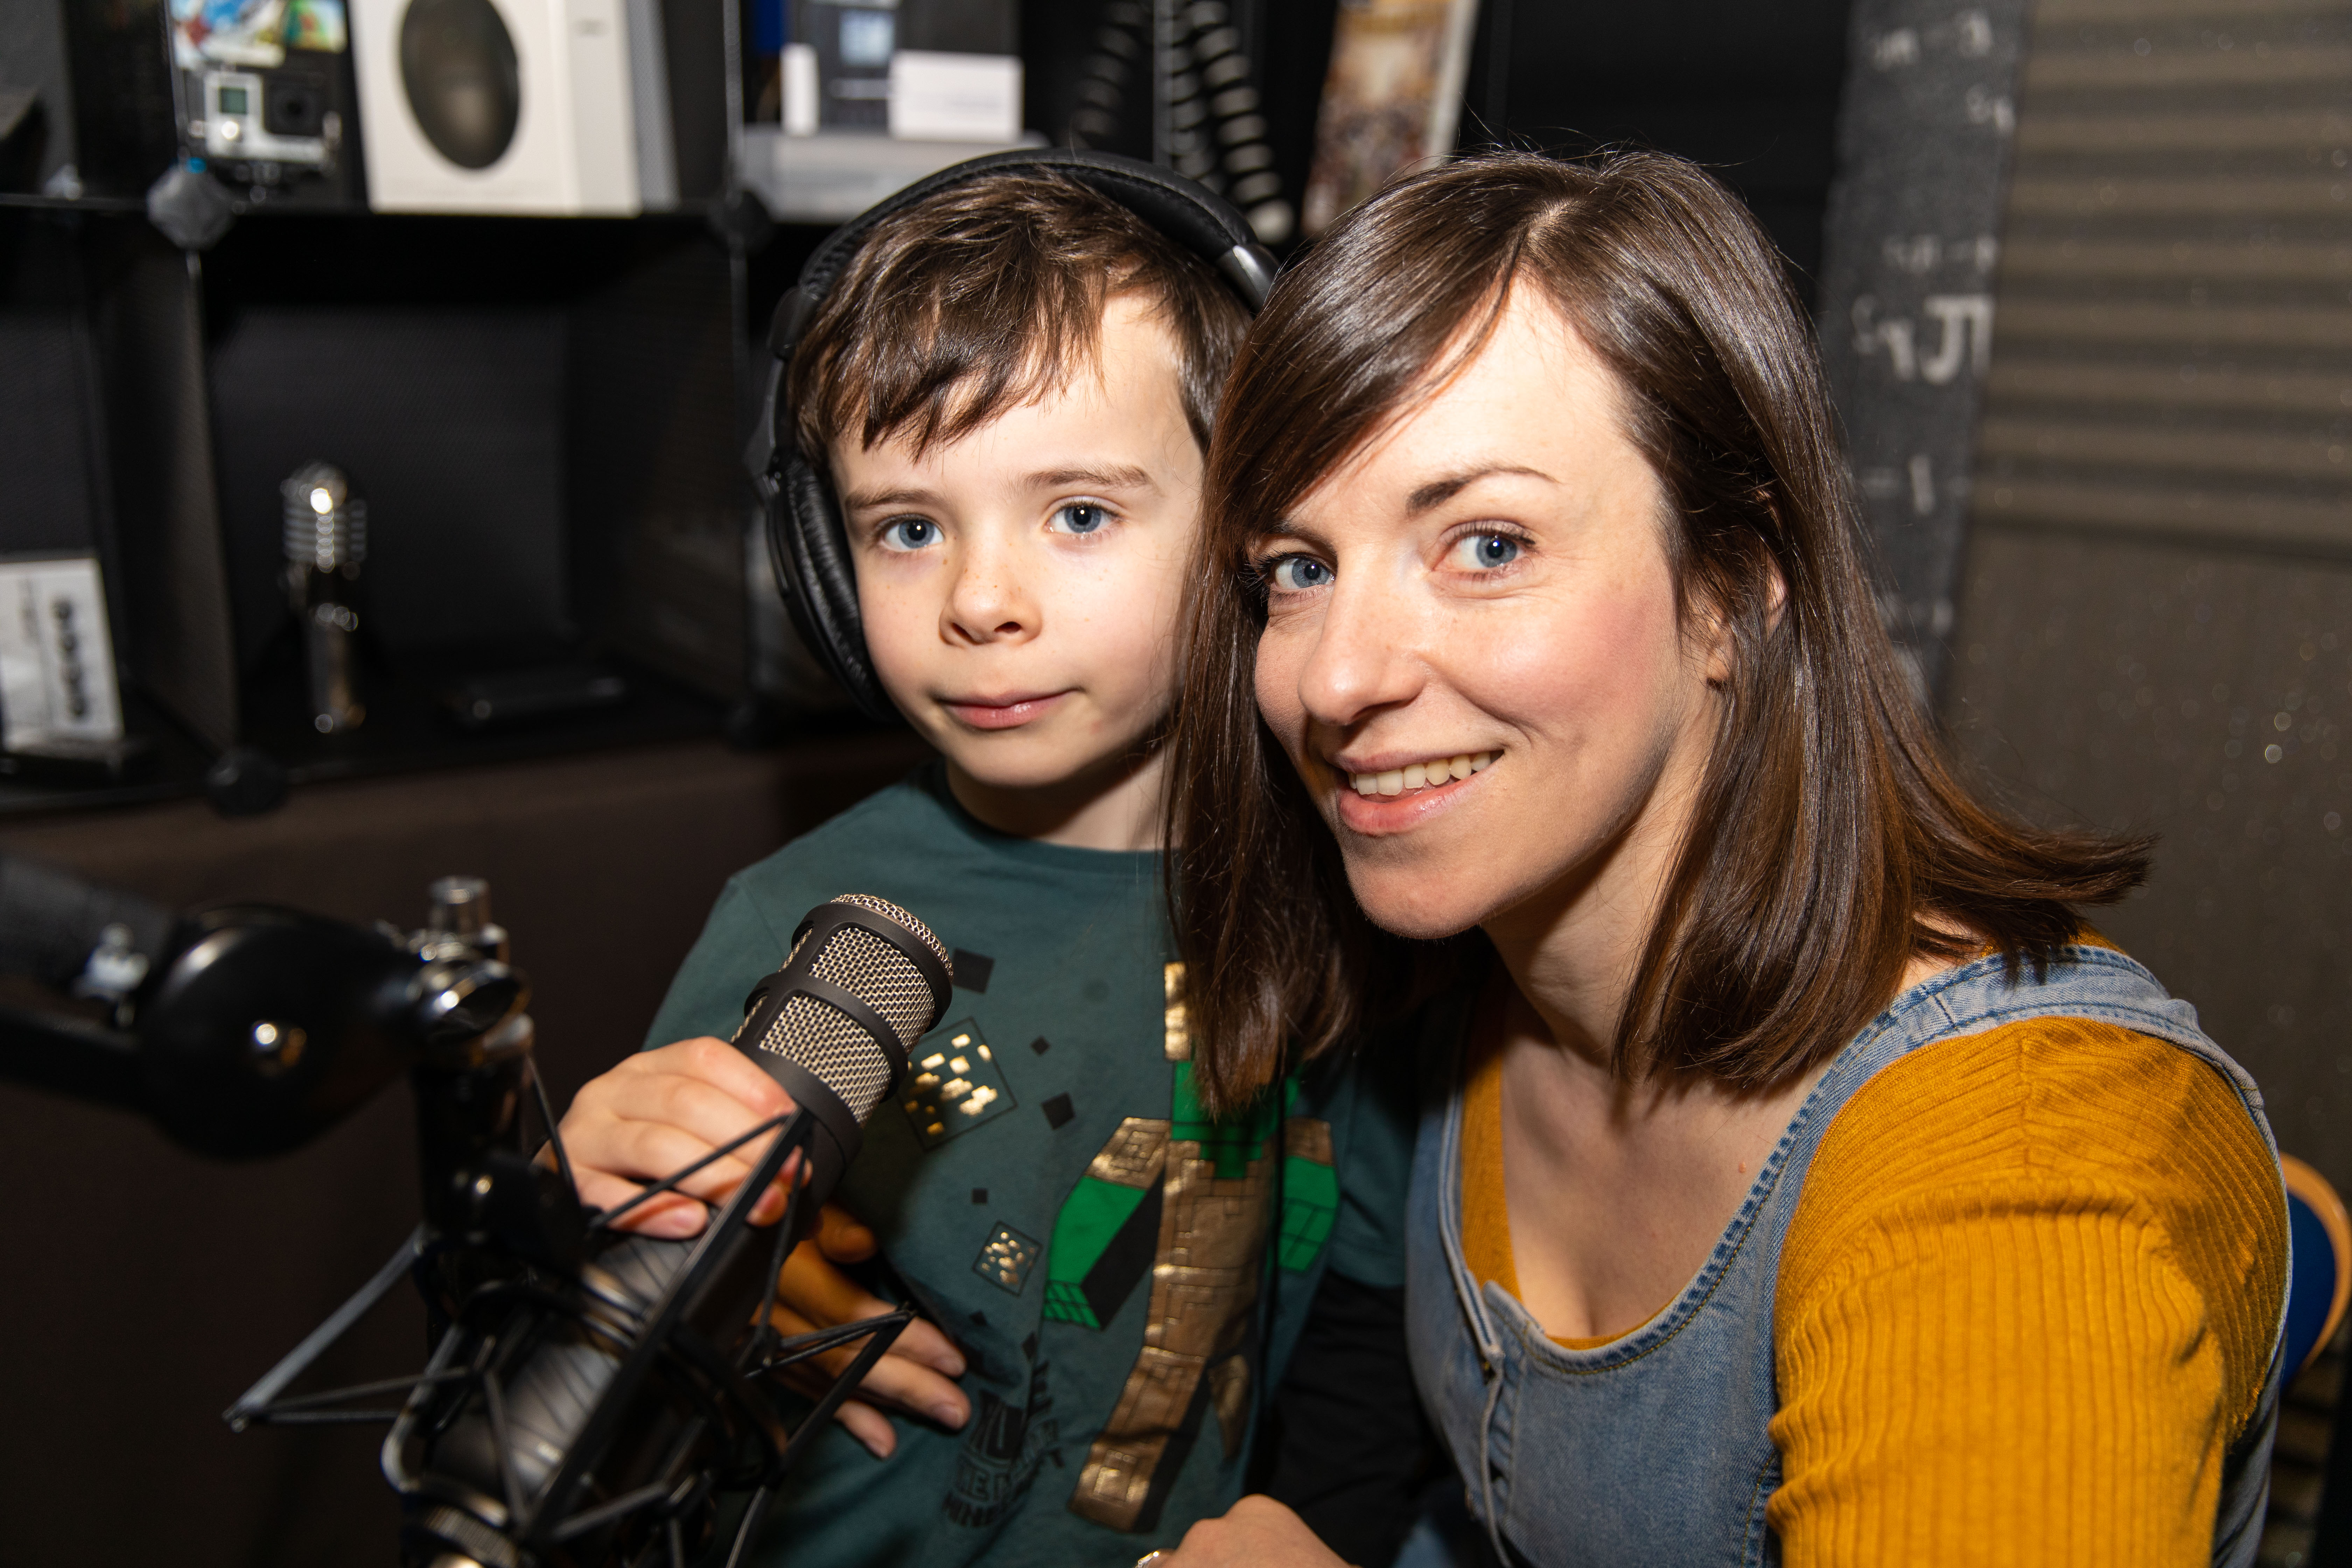 Dr Kate Arrow and son Alasdair Gray,6, at the recording of the podcast for child patients to share their experiences